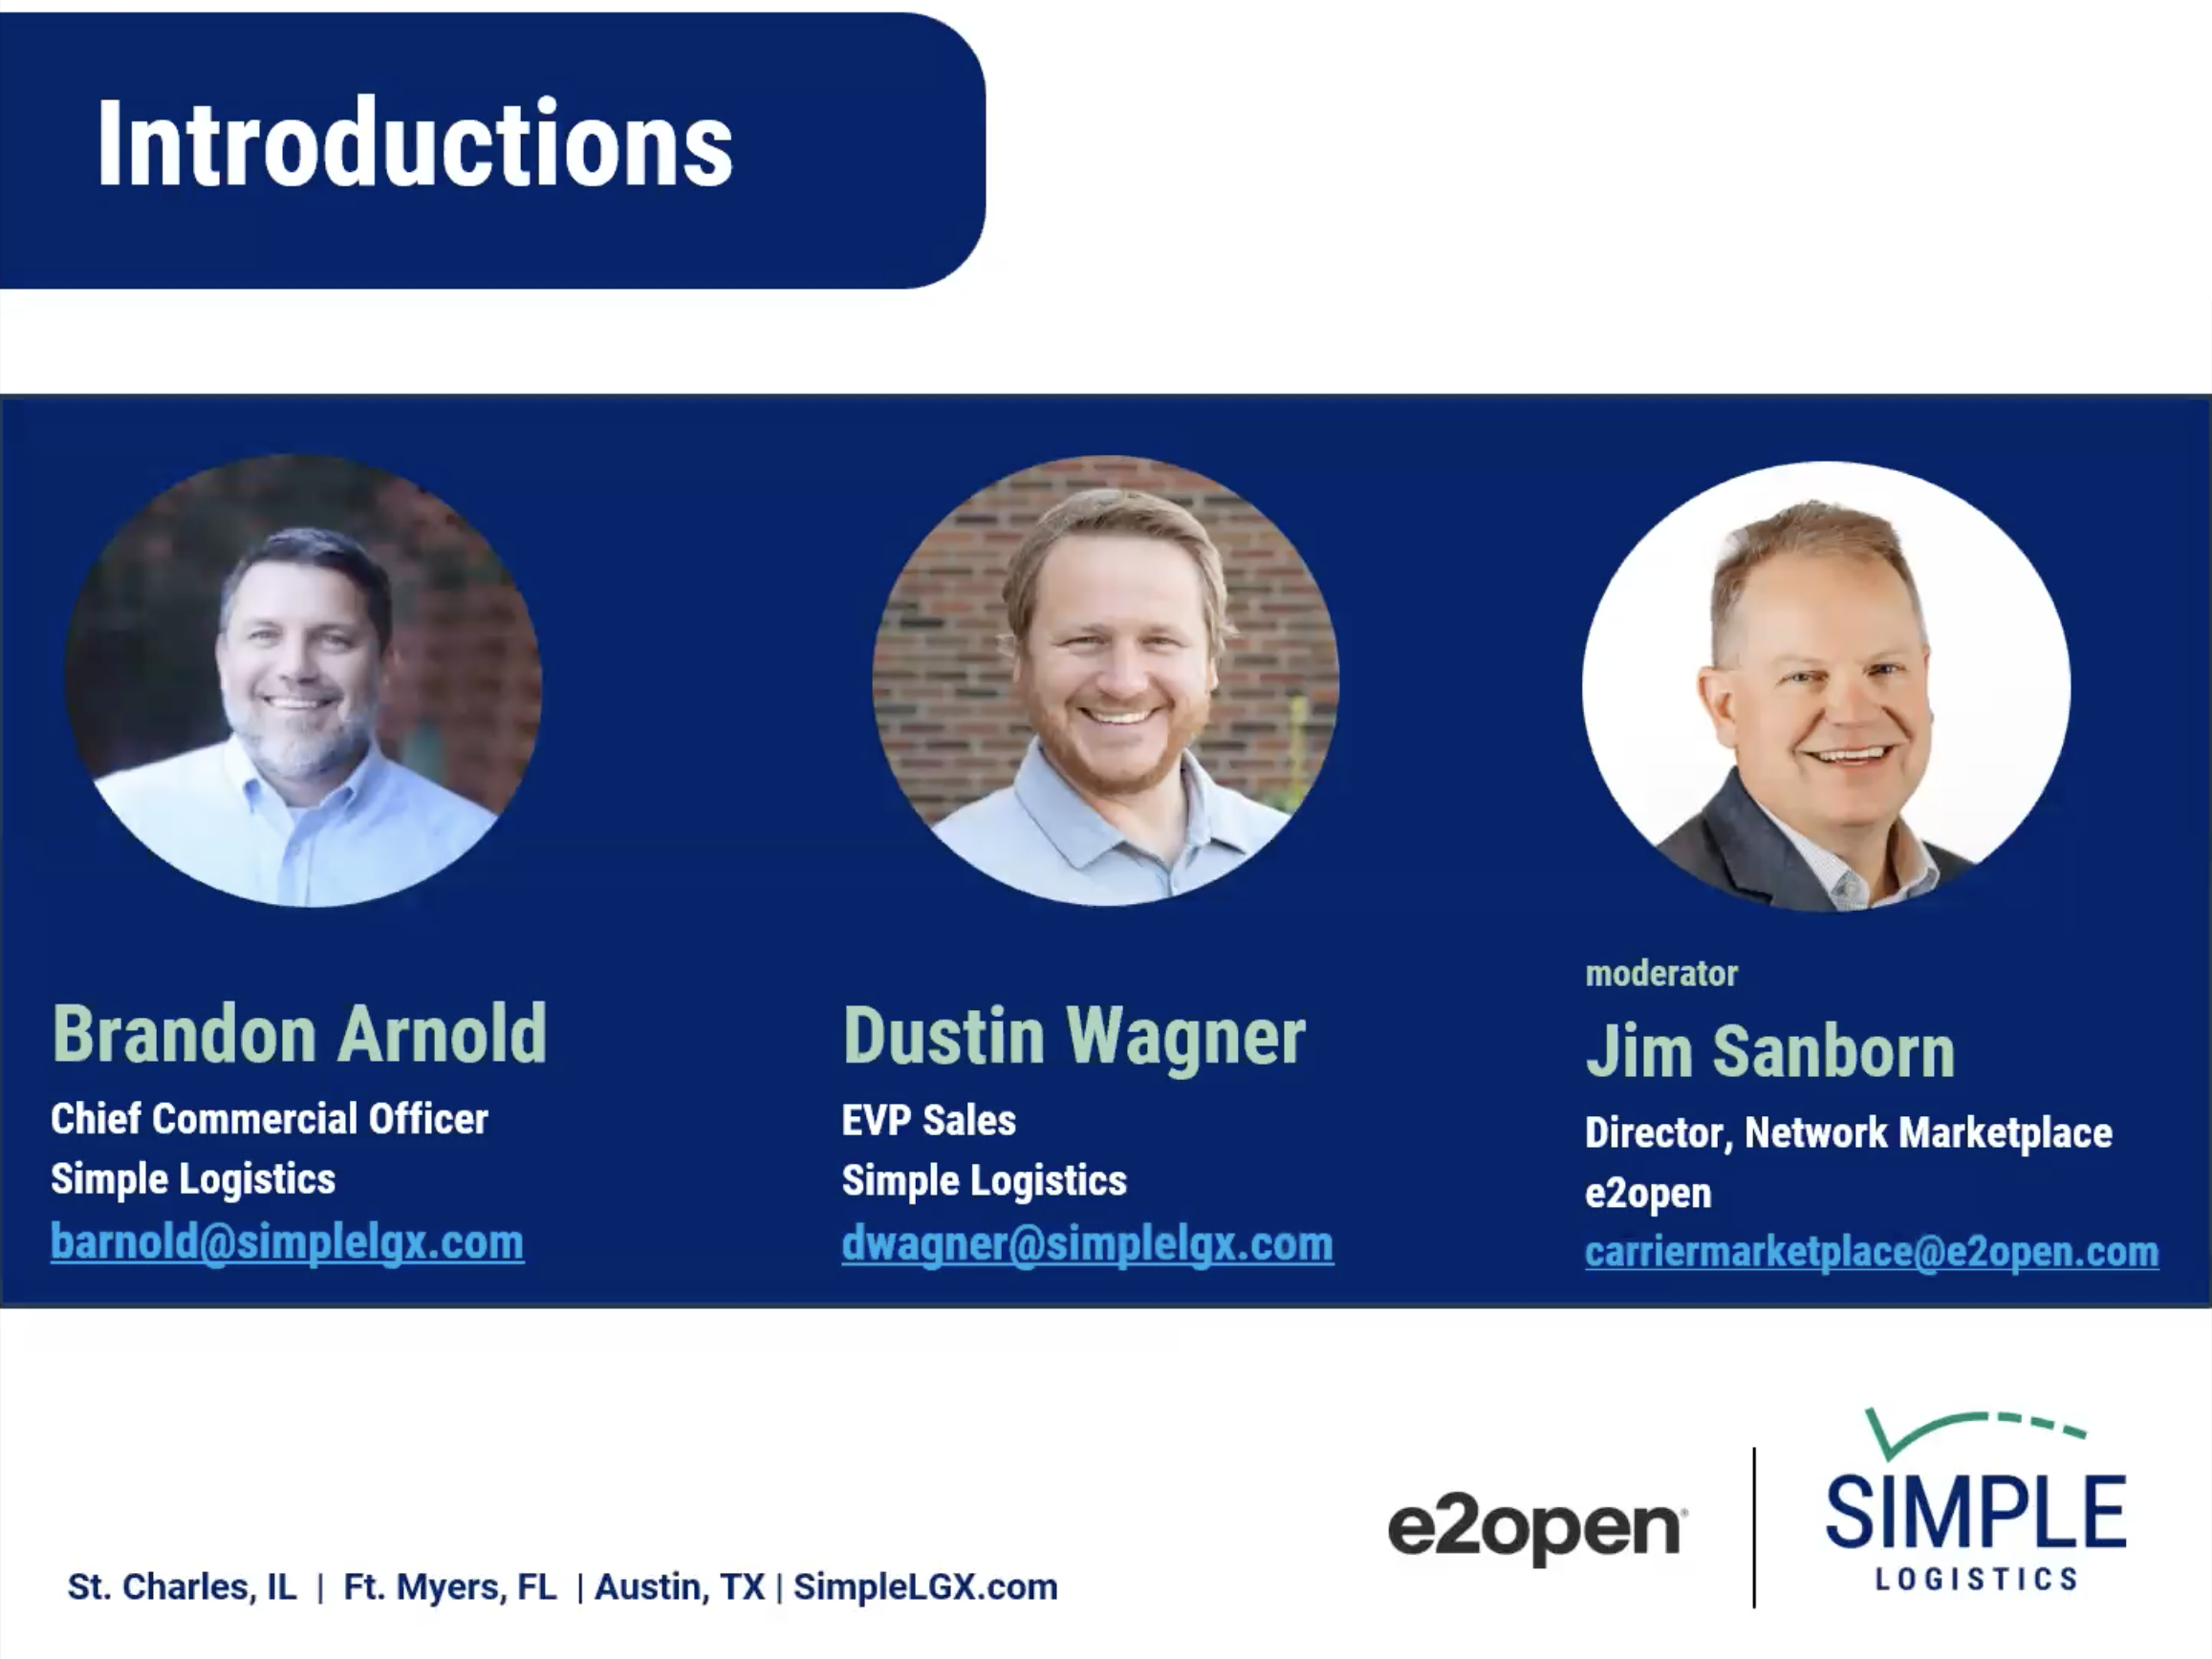 Intro slide for webinar introducing the speakers: Jim Sanborn (e2open), Brandon Arnold (Simple Logistics), and Dustin Wagner (Simple Logistics).